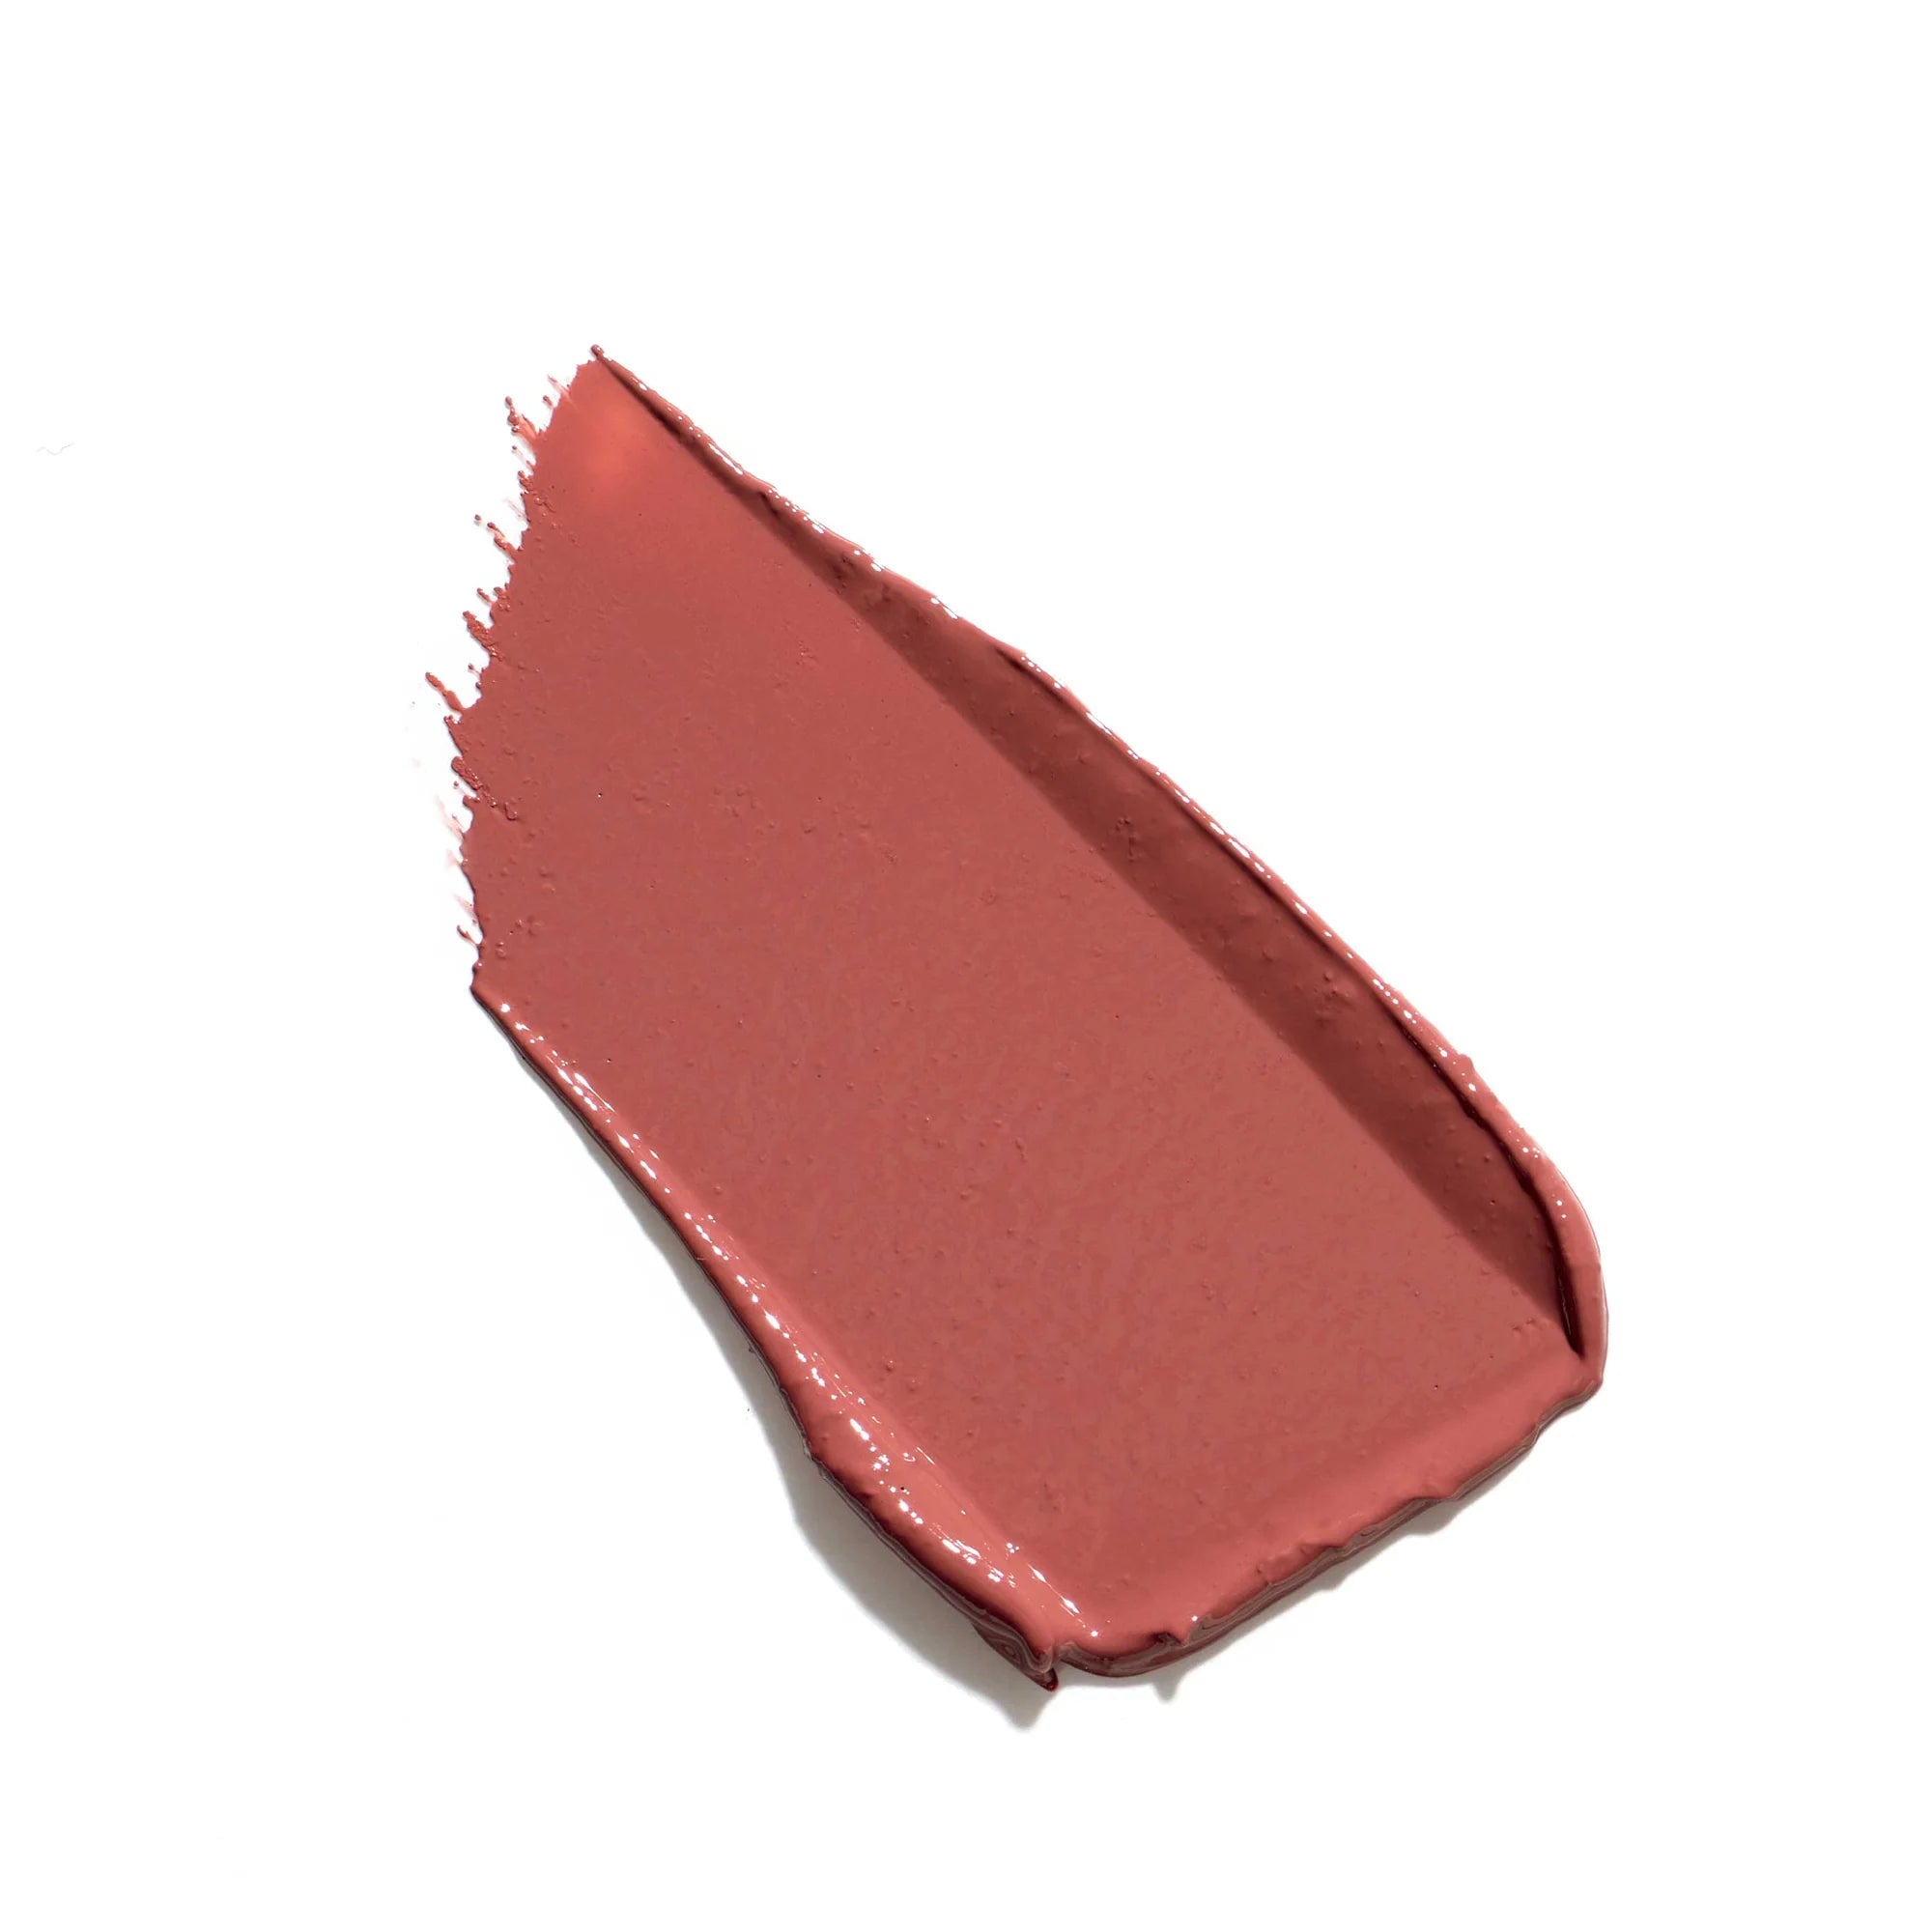 Jane Iredale's ColorLuxe Hydrating Cream Lipstick - swatch and color Rosebud - warm medium pink brown